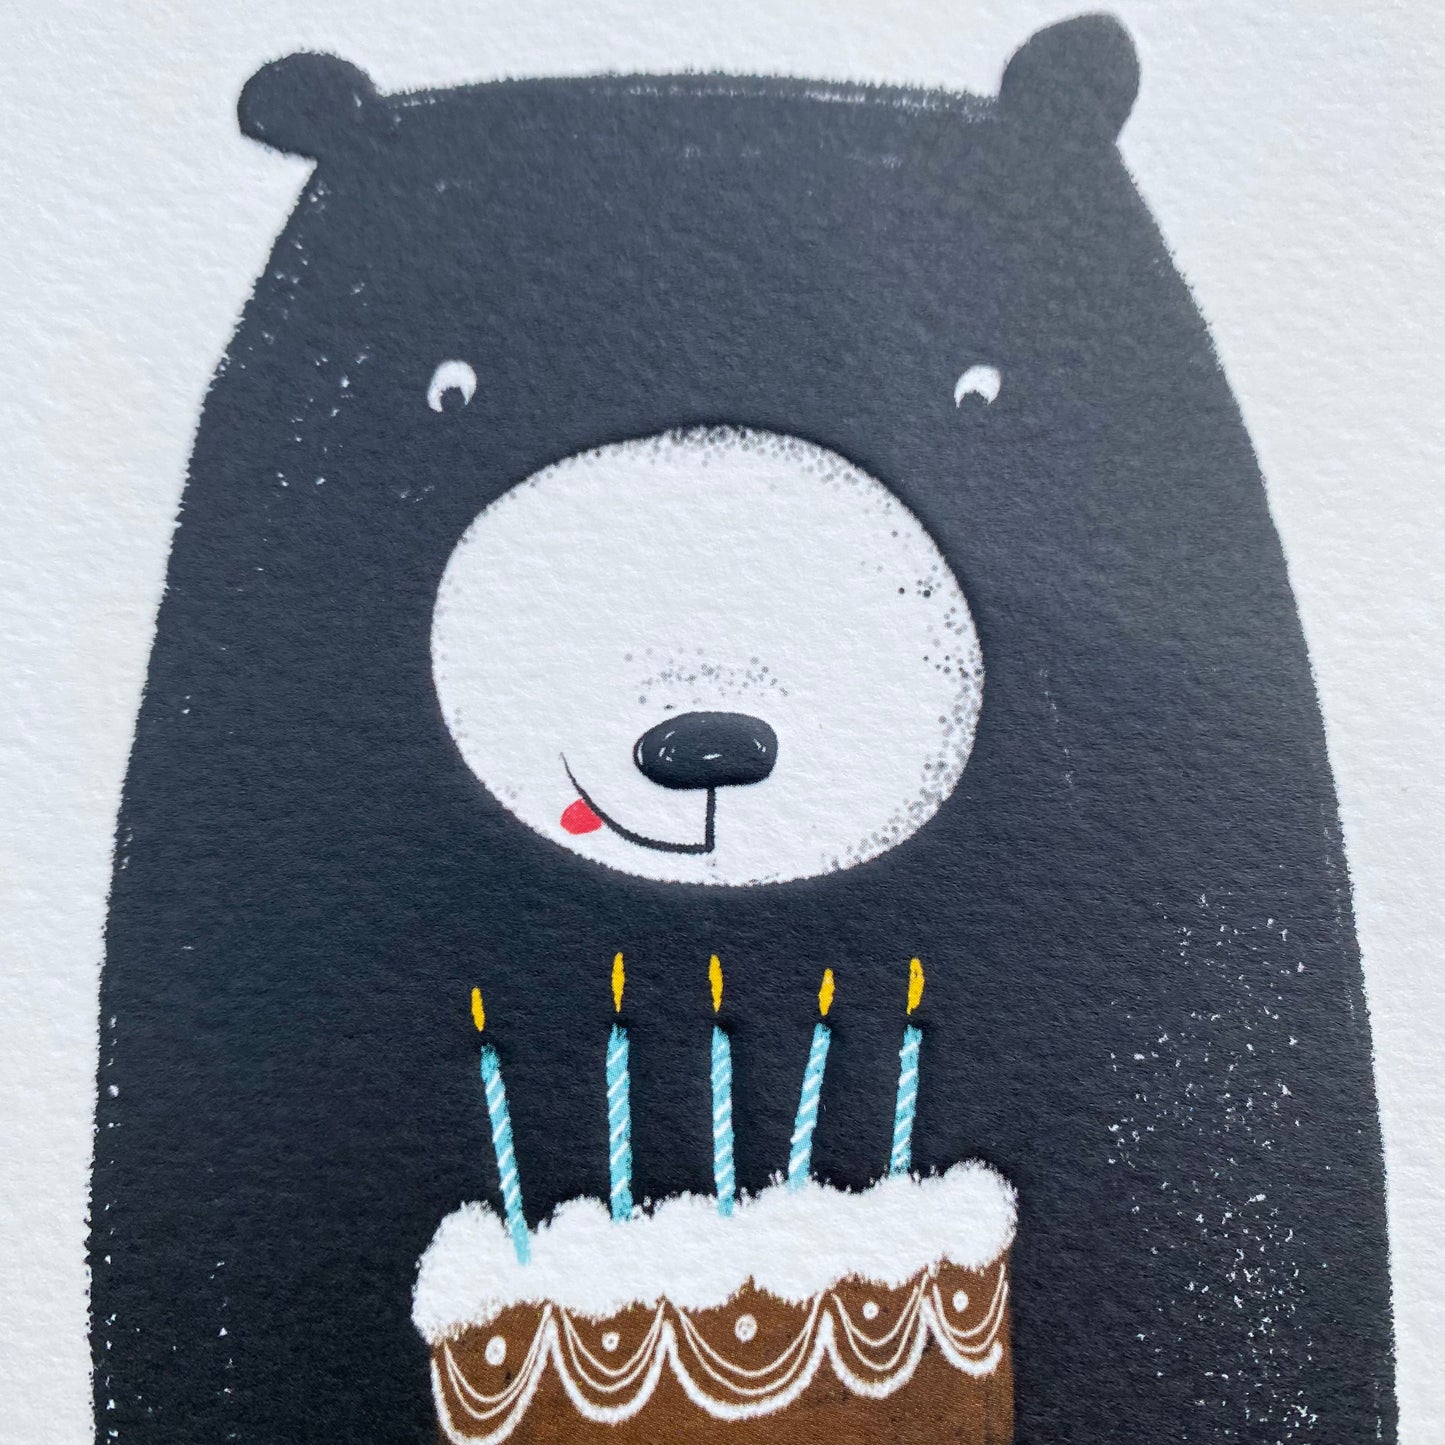 Bear and Birthday Cake by Robert Reader BE12